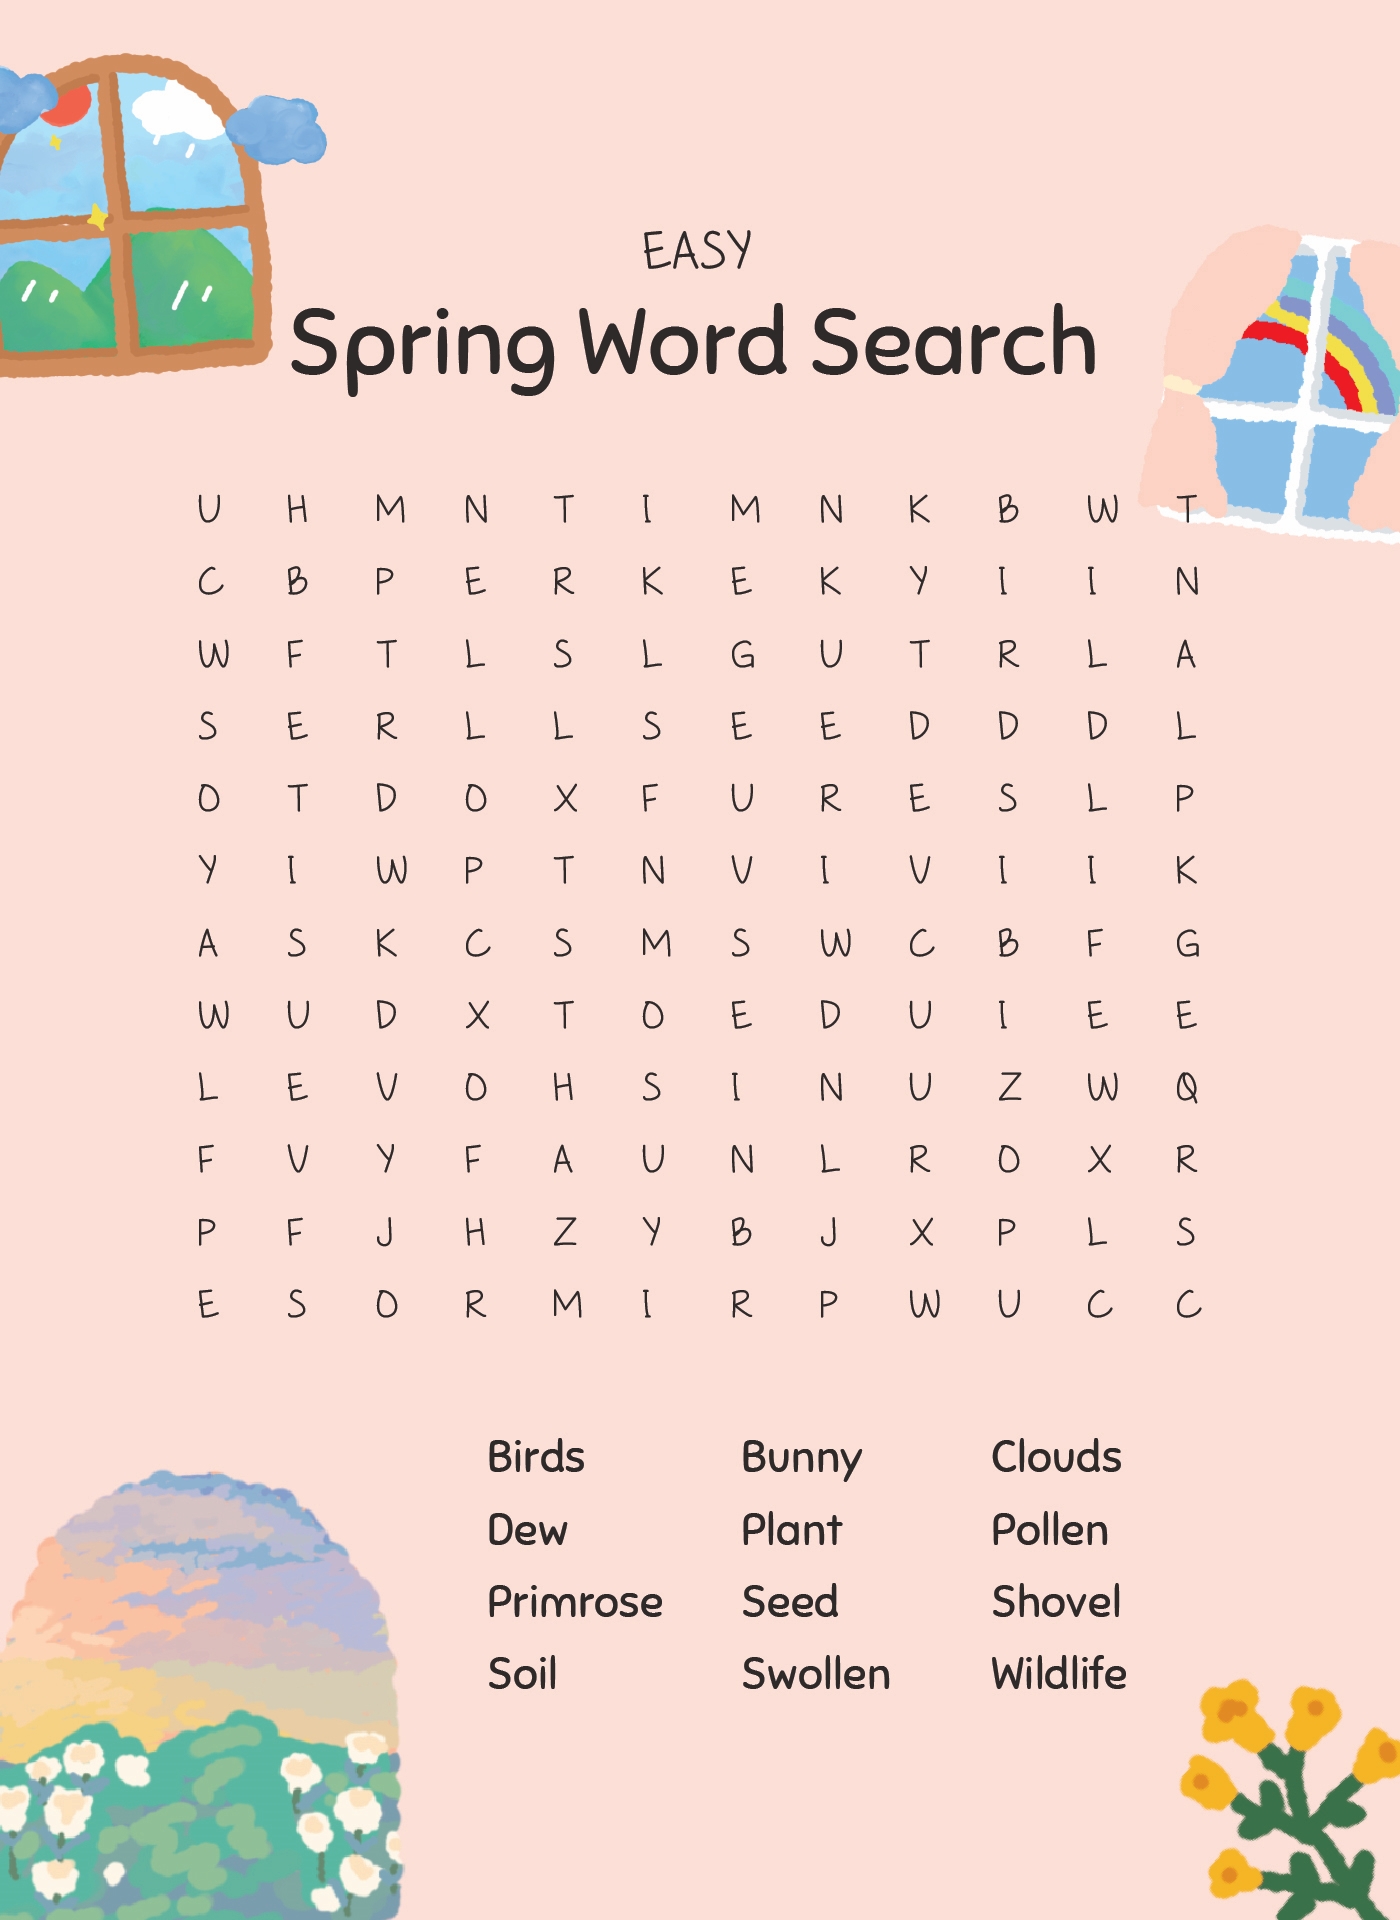 5 Best Images of Easy Spring Word Search Printables - Printable Spring